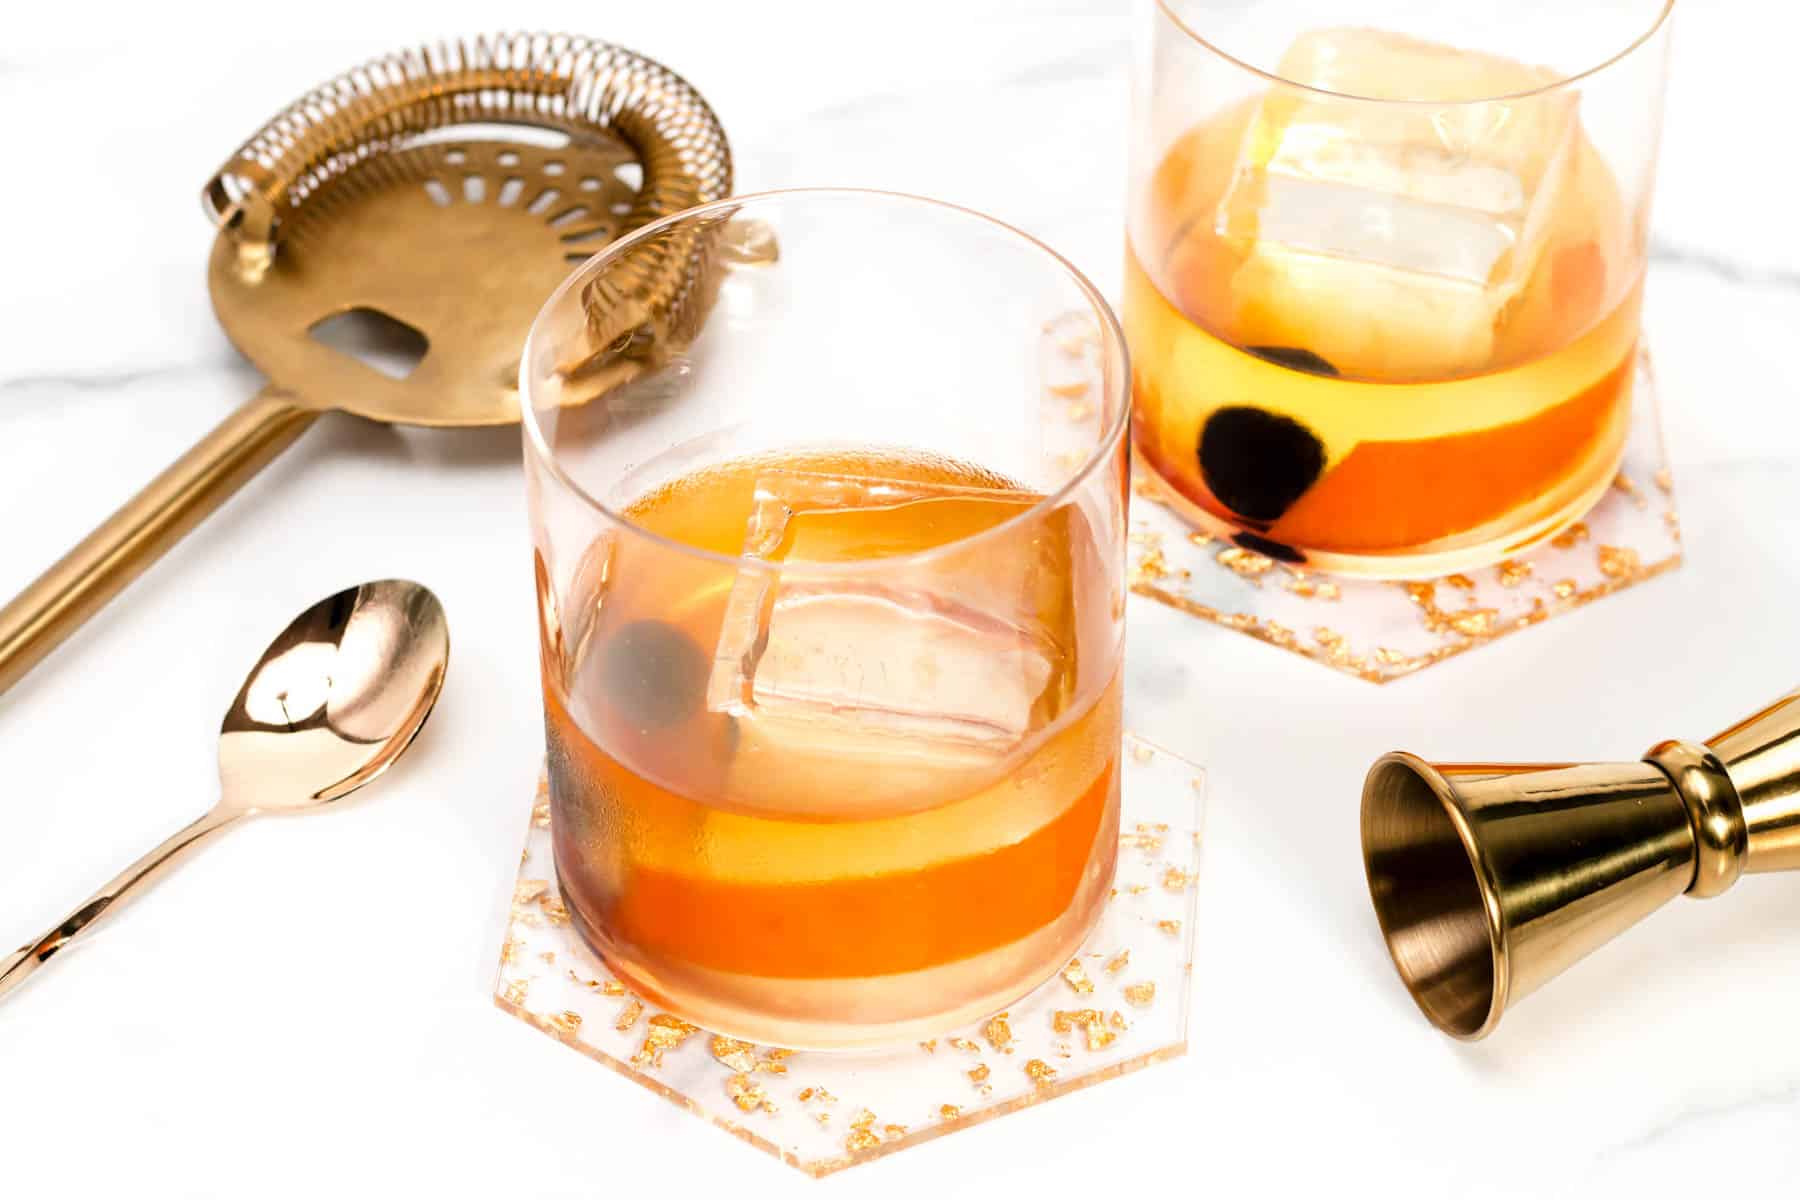 Two glasses with ice and a spoon next to them, perfect for serving a refreshing Scotch Old-Fashioned cocktail.